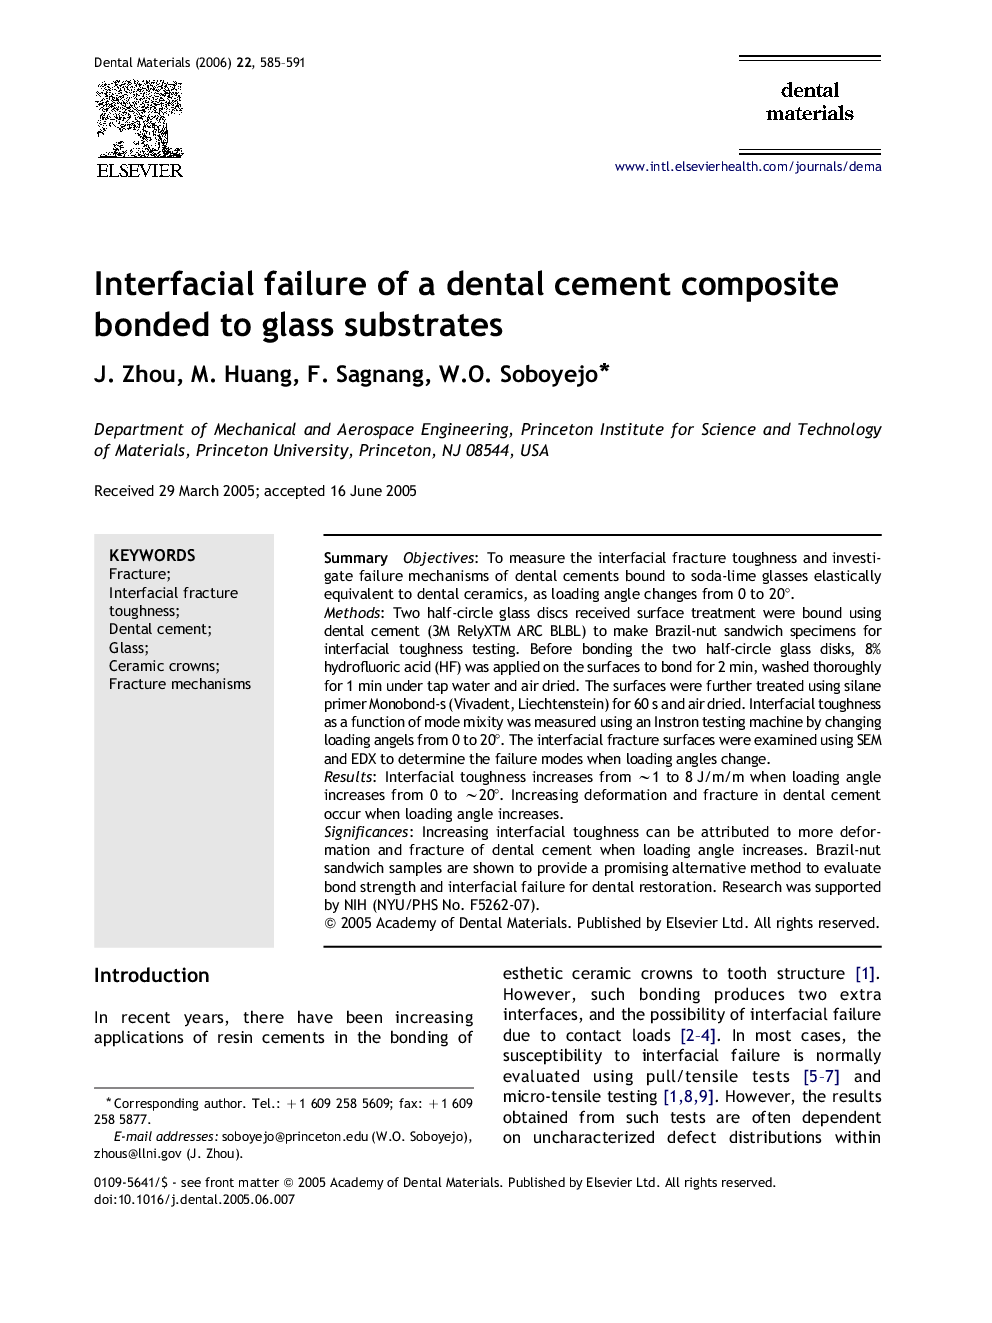 Interfacial failure of a dental cement composite bonded to glass substrates